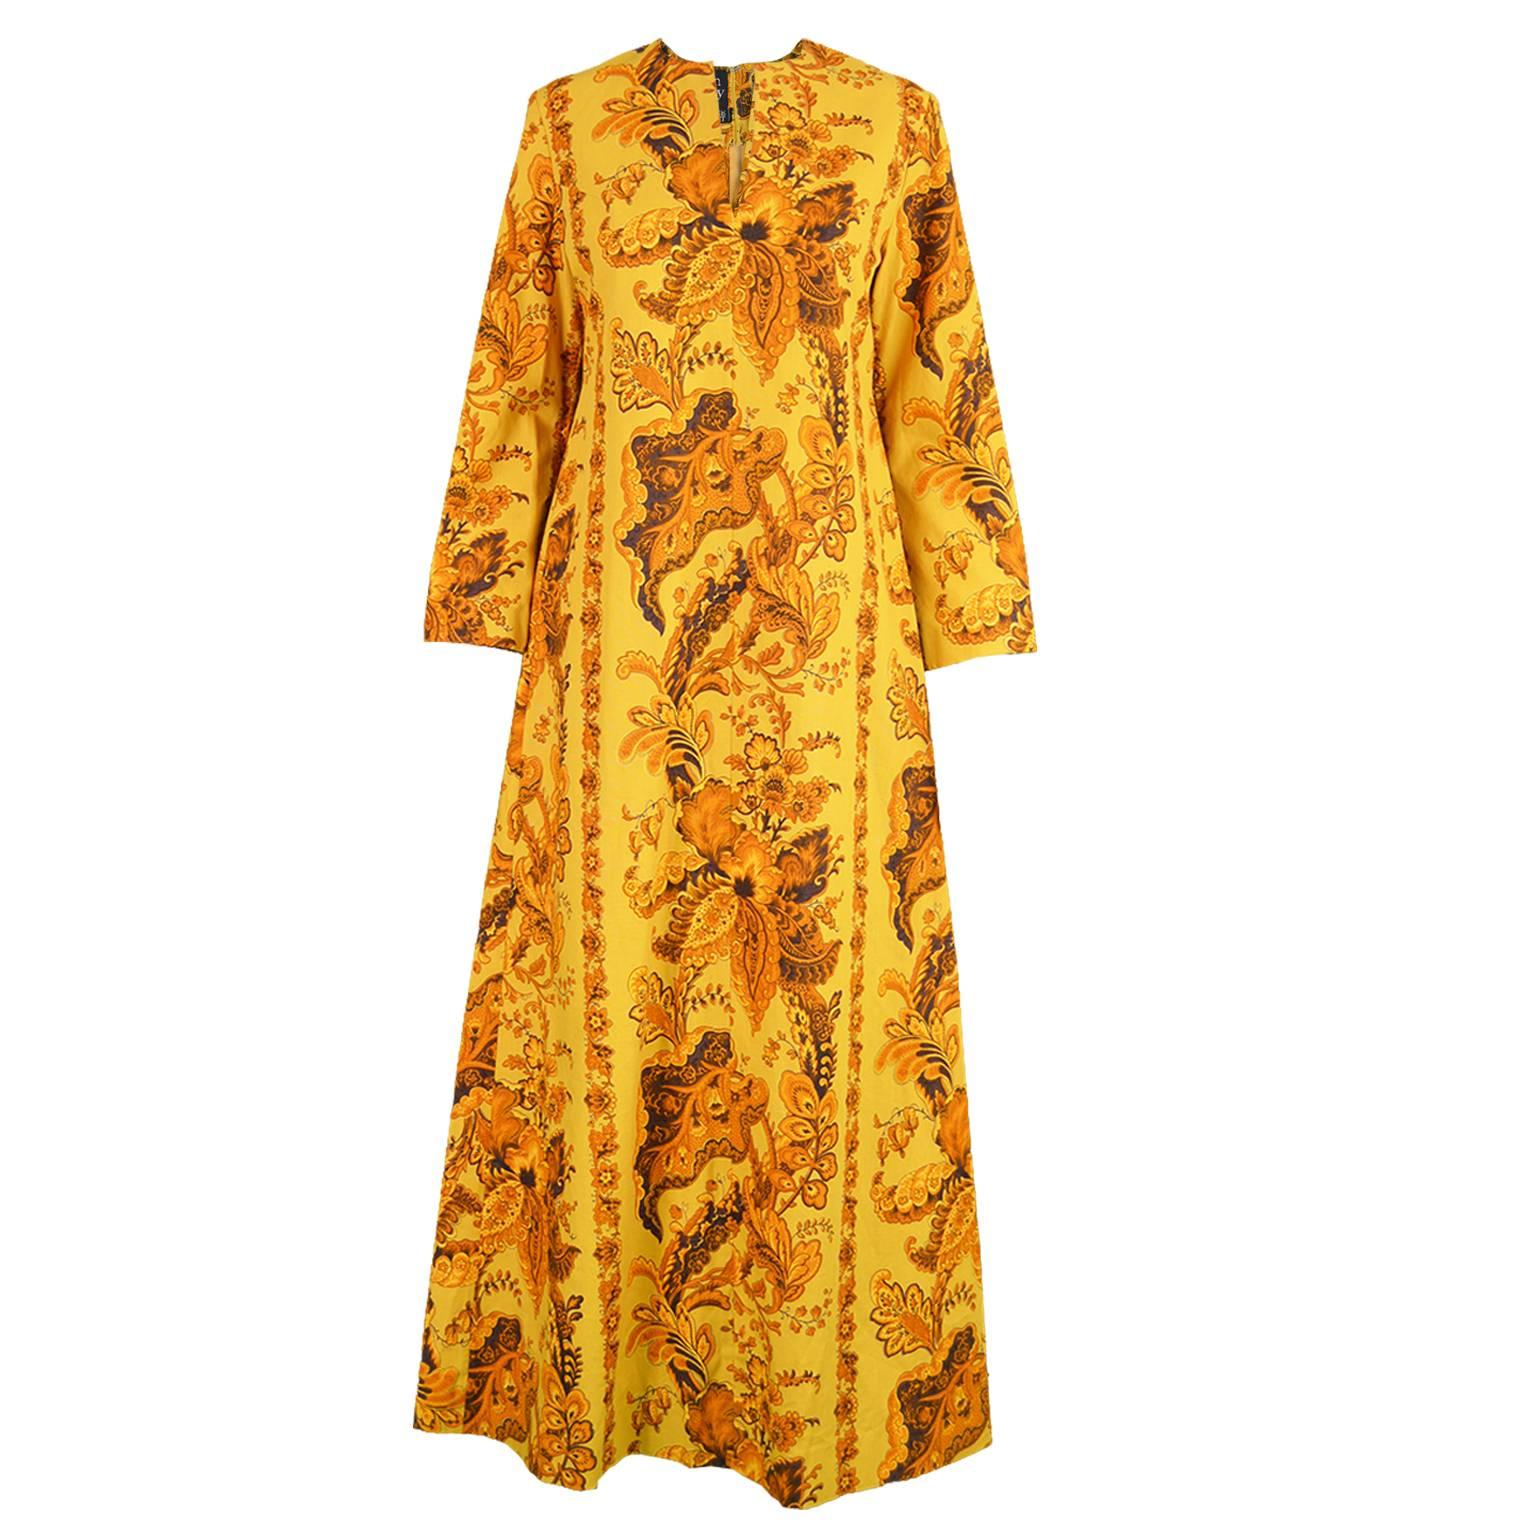 An absolutely stunning vintage women's dress from the late 1960s by genius and iconic vintage designer, Janice Wainwright for Simon Massey, before she started her own label in 1970. Made with an incredible, vibrant, French fabric called 'La Paiva'